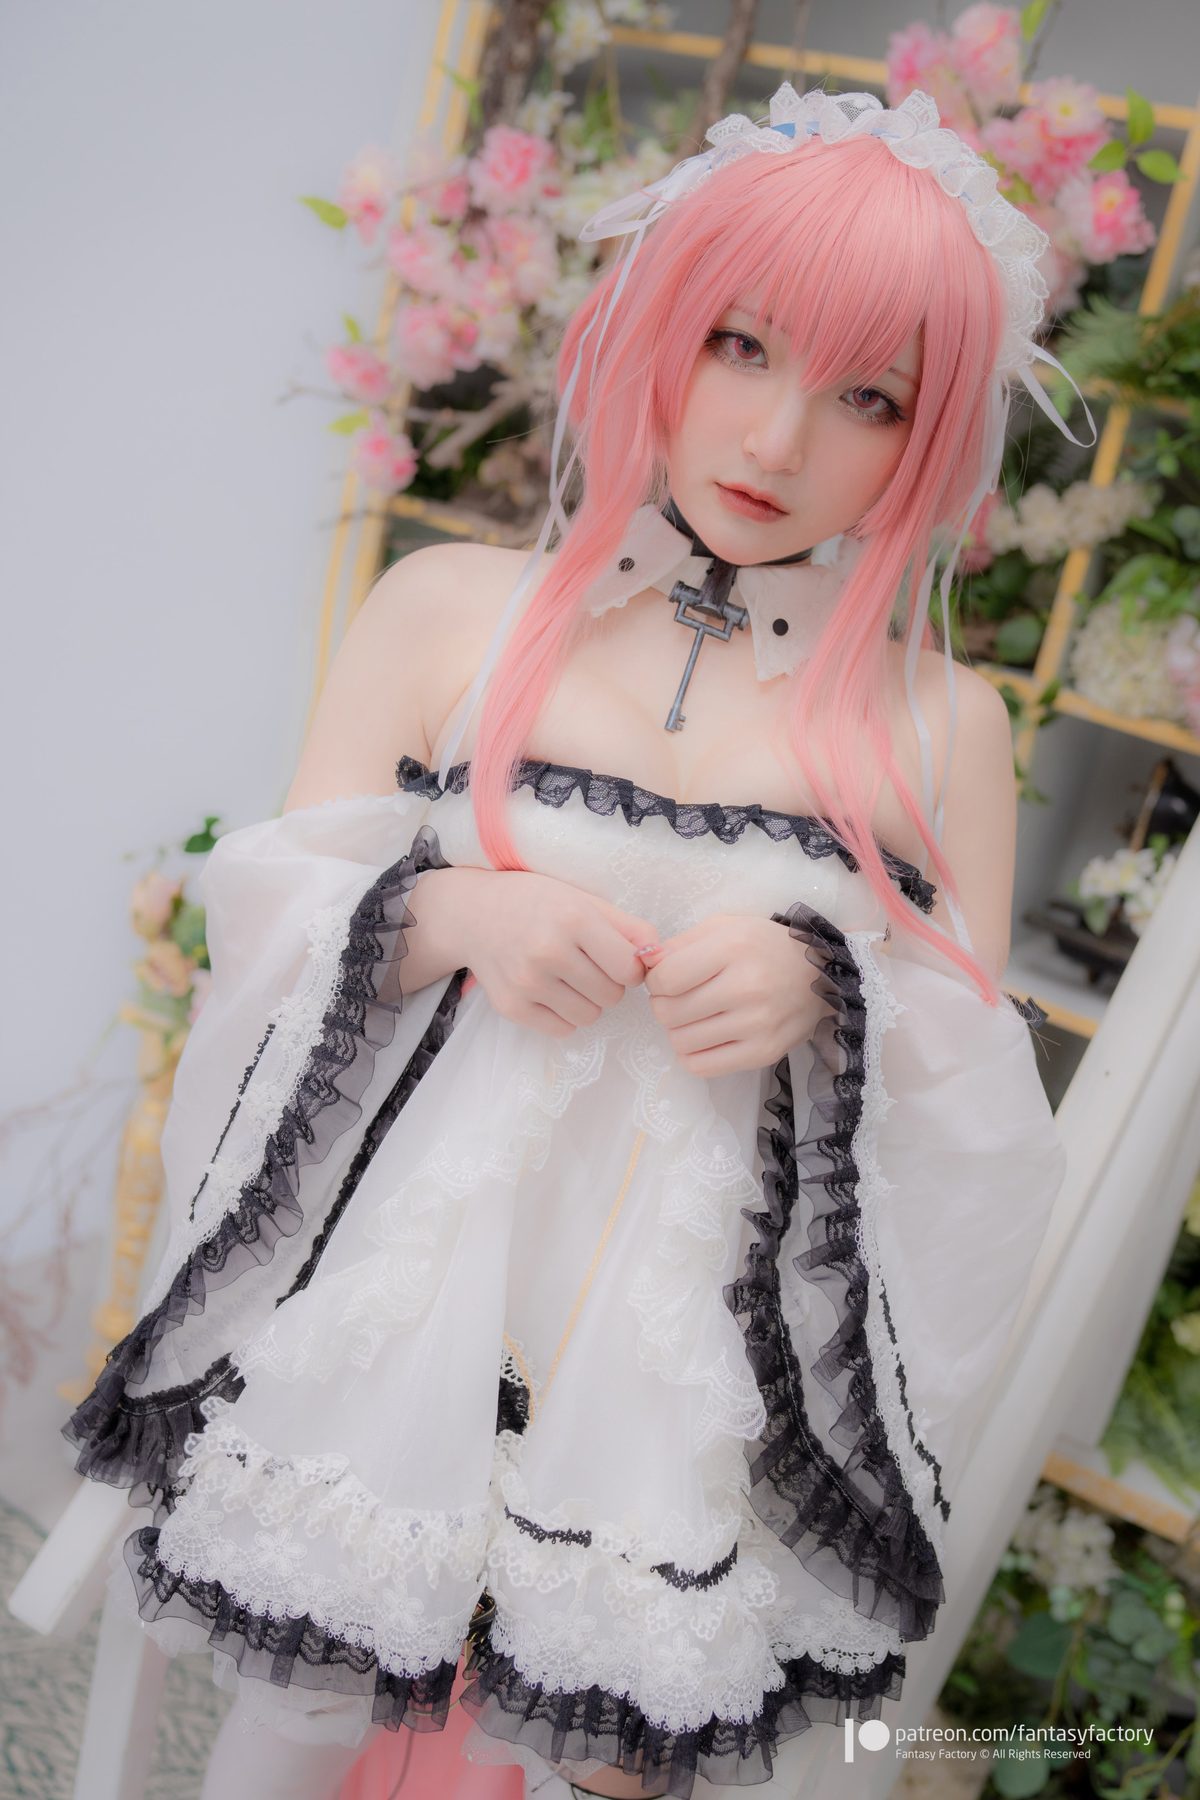 View - Fantasy Factory 小丁 - Cosplay 2022.01 A - 